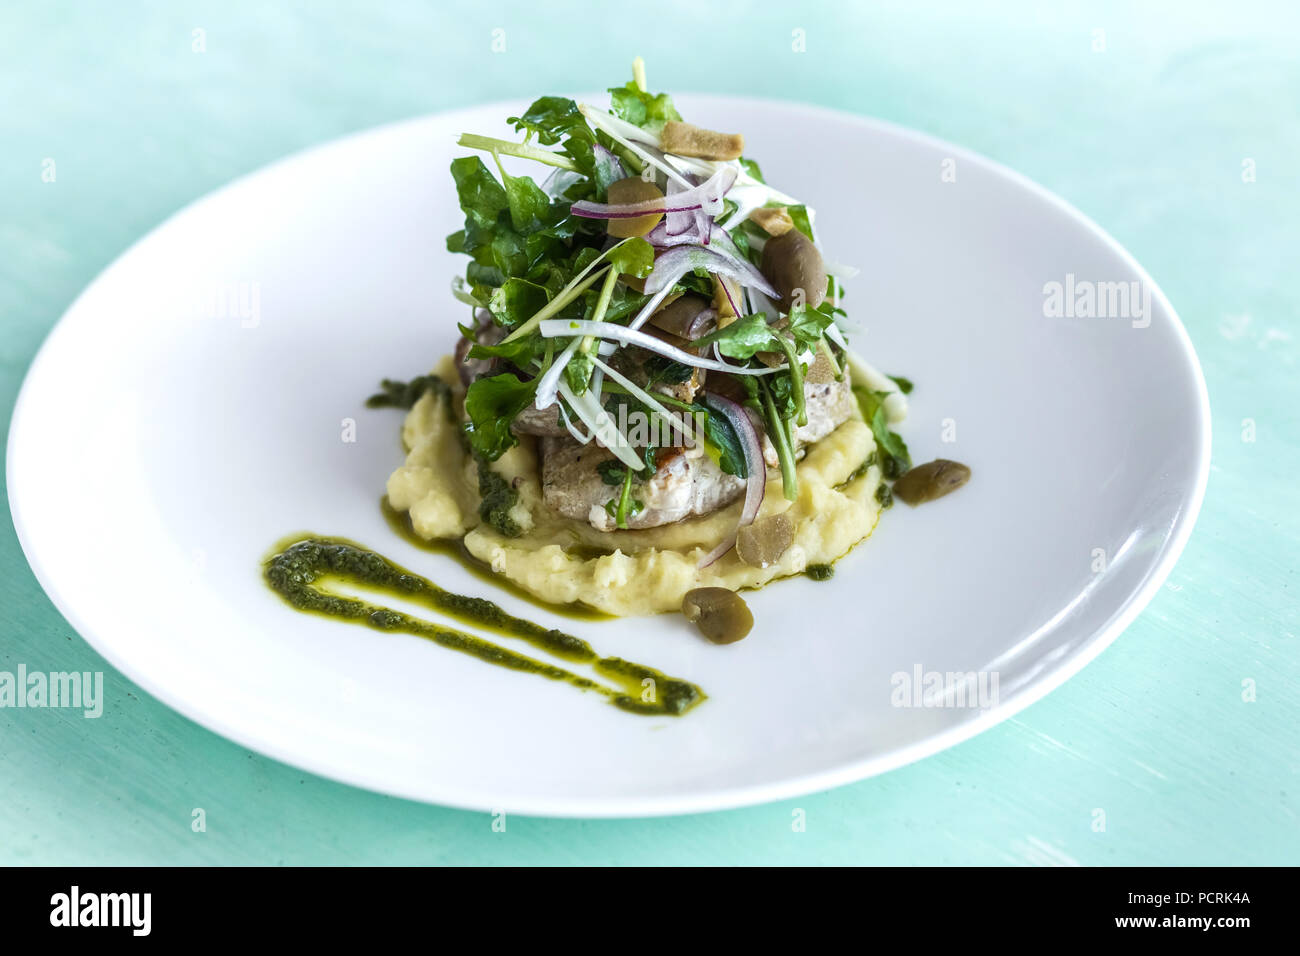 Mashed potato with fish steak and salad on white plate Stock Photo